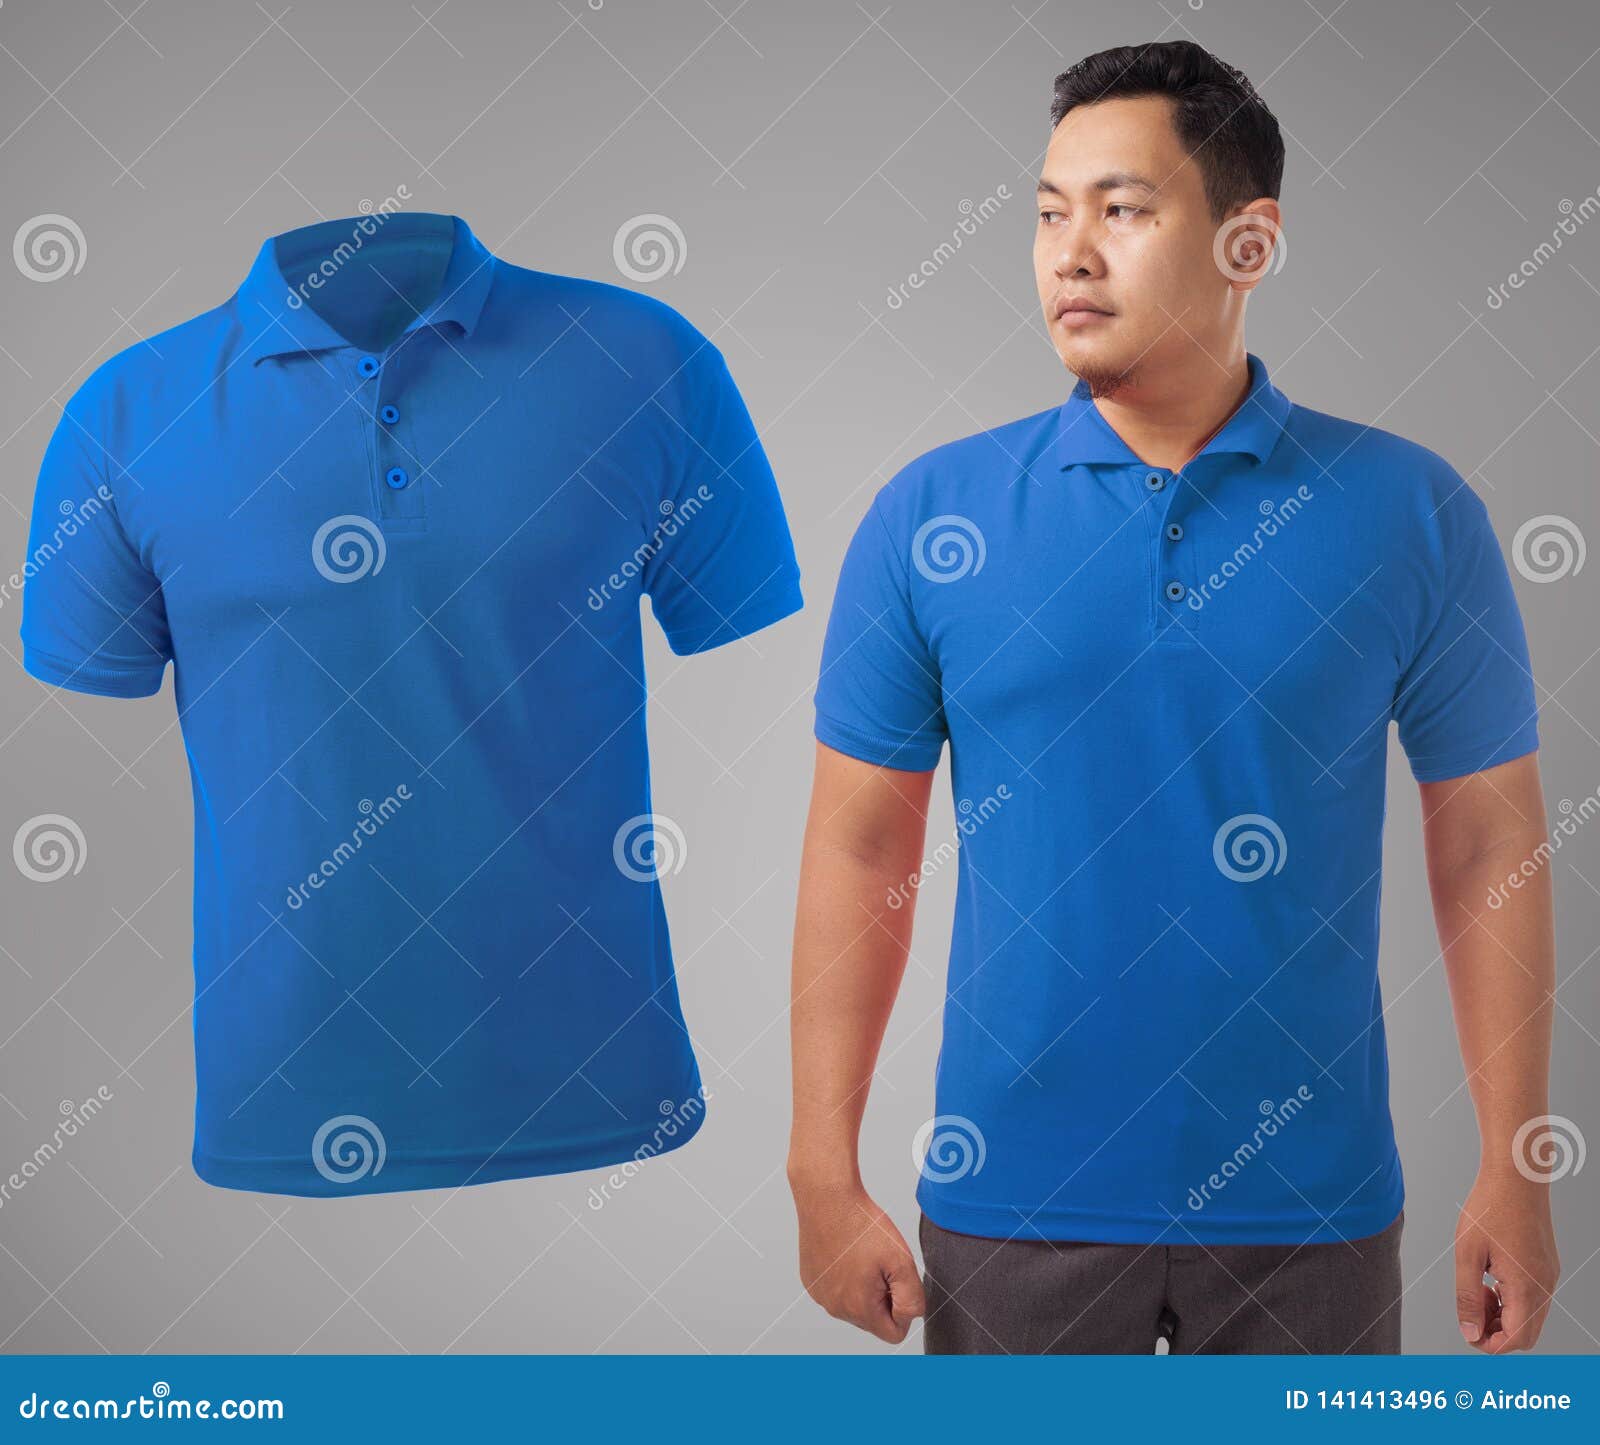 Blue Collared Shirt Design Template Stock Photo - Image of chest ...